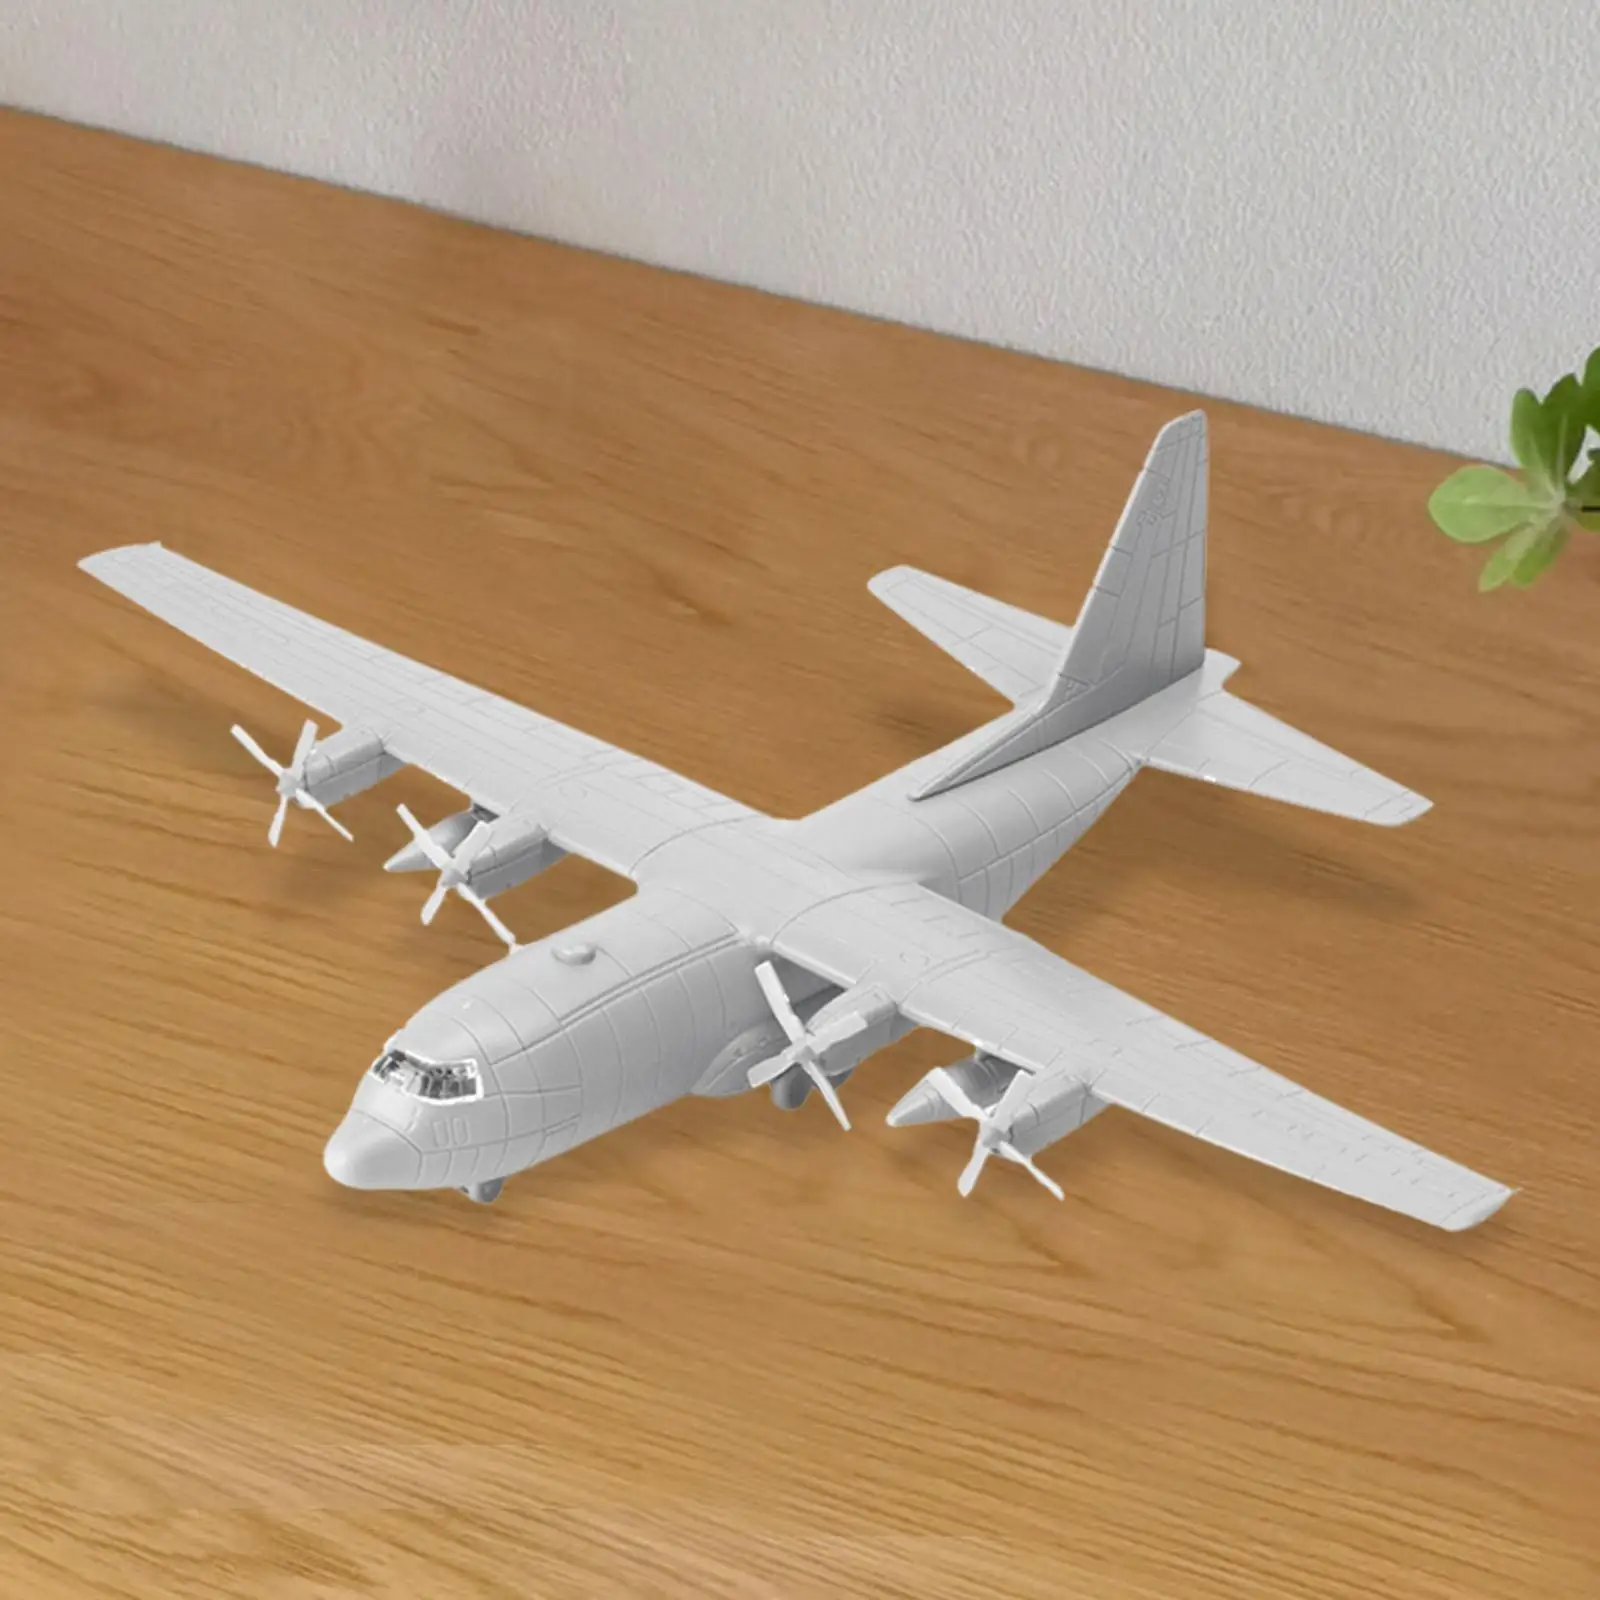 1:144 Scale Airplane Model Diecast Plane Display Ornaments For Table